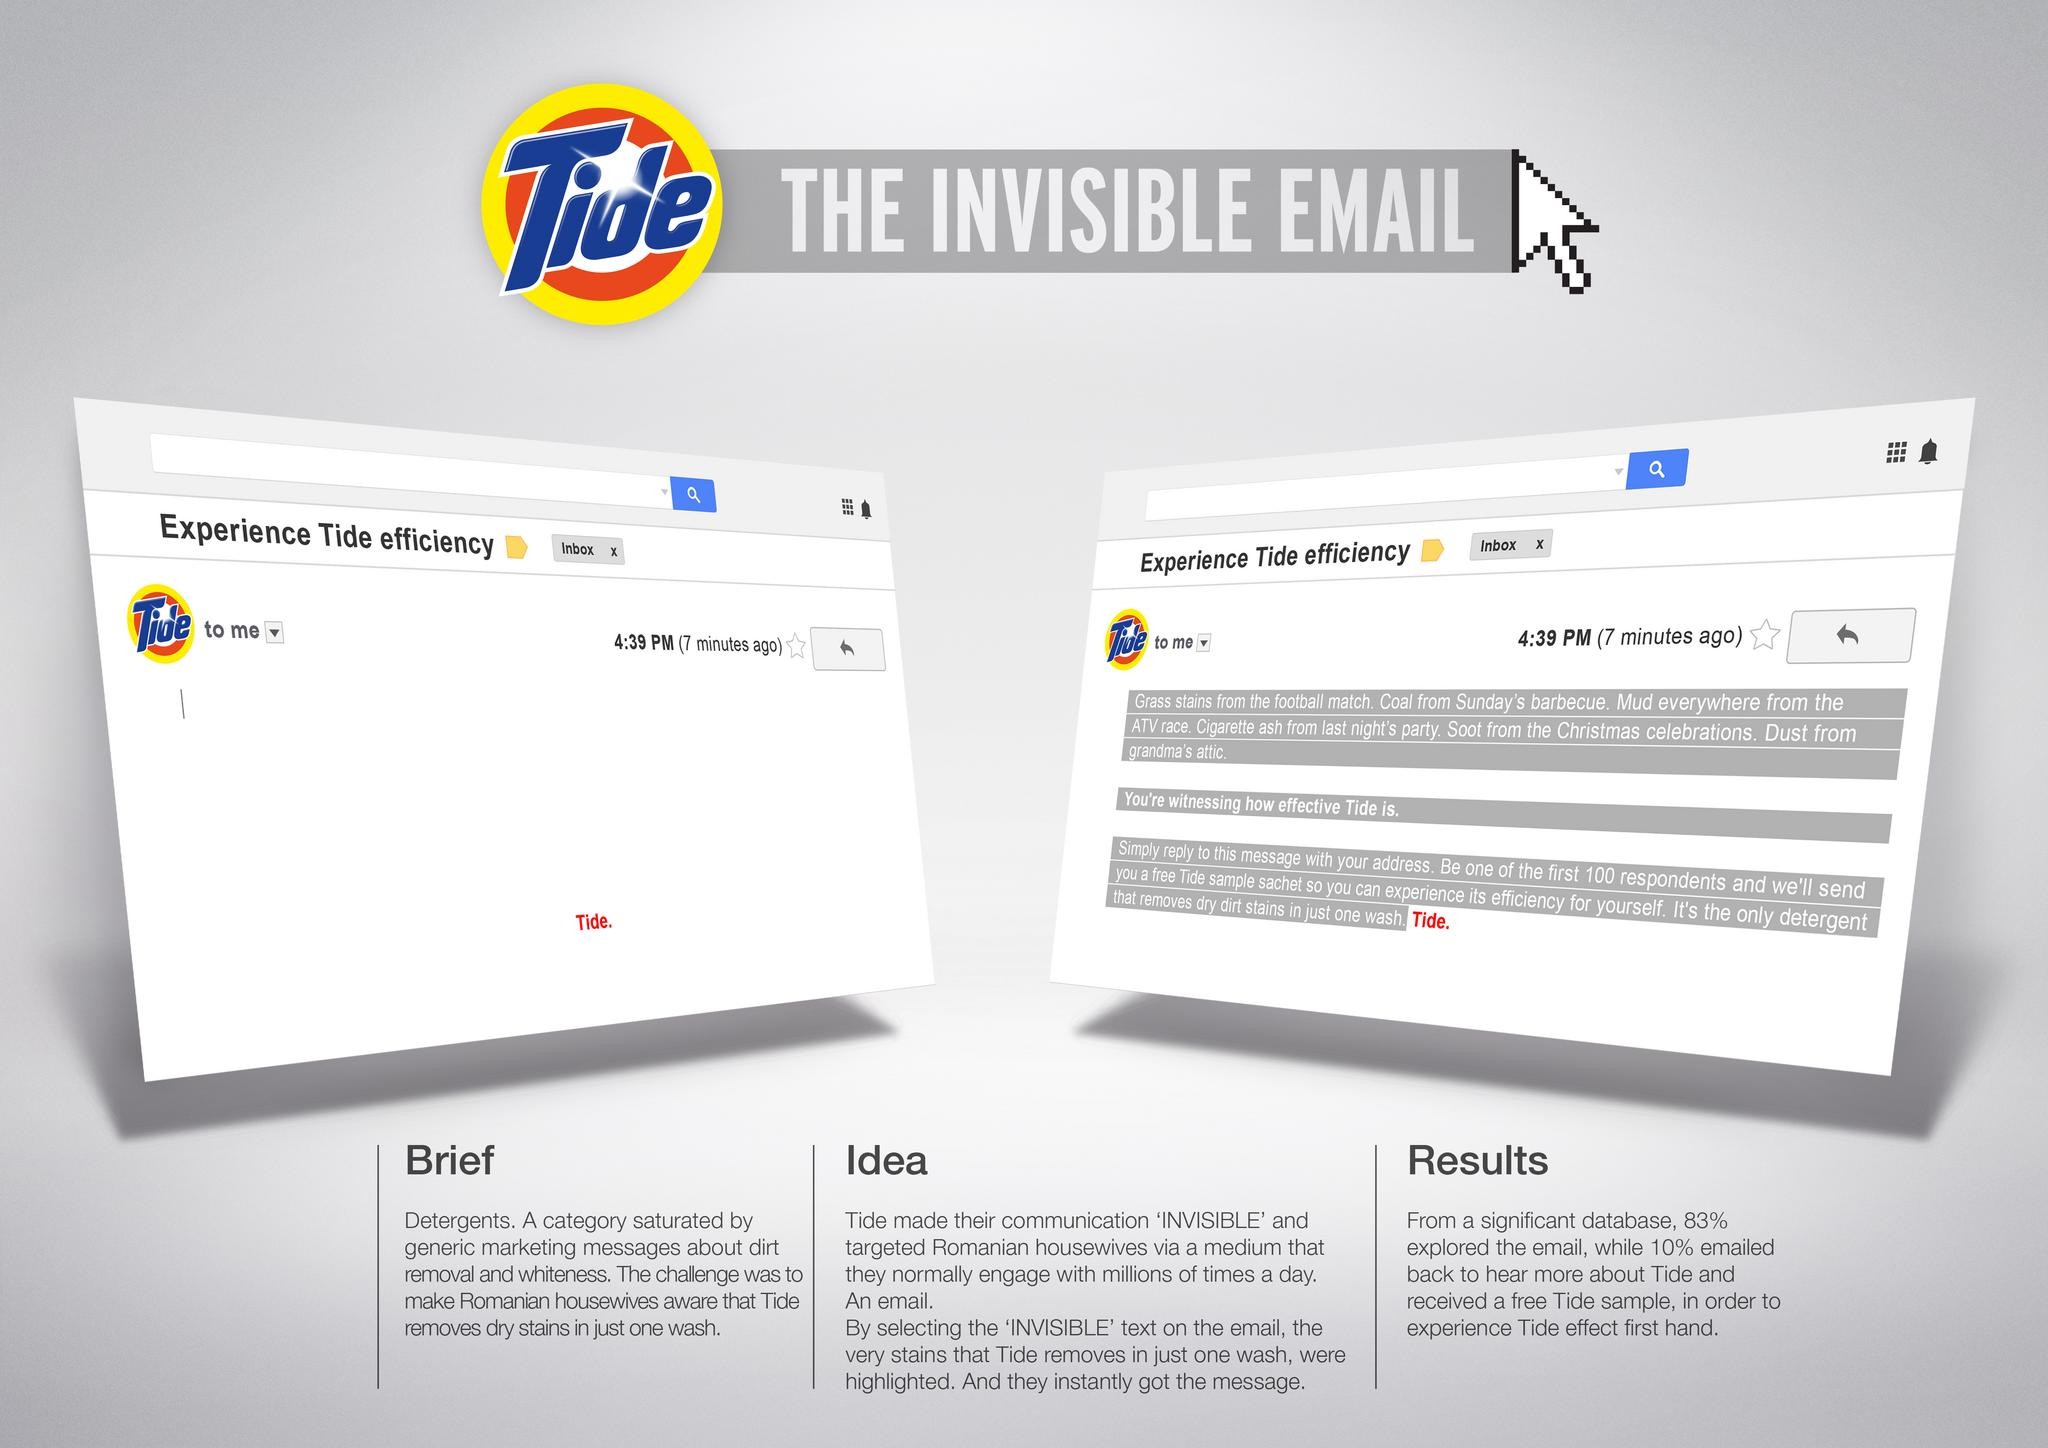 THE INVISIBLE EMAIL